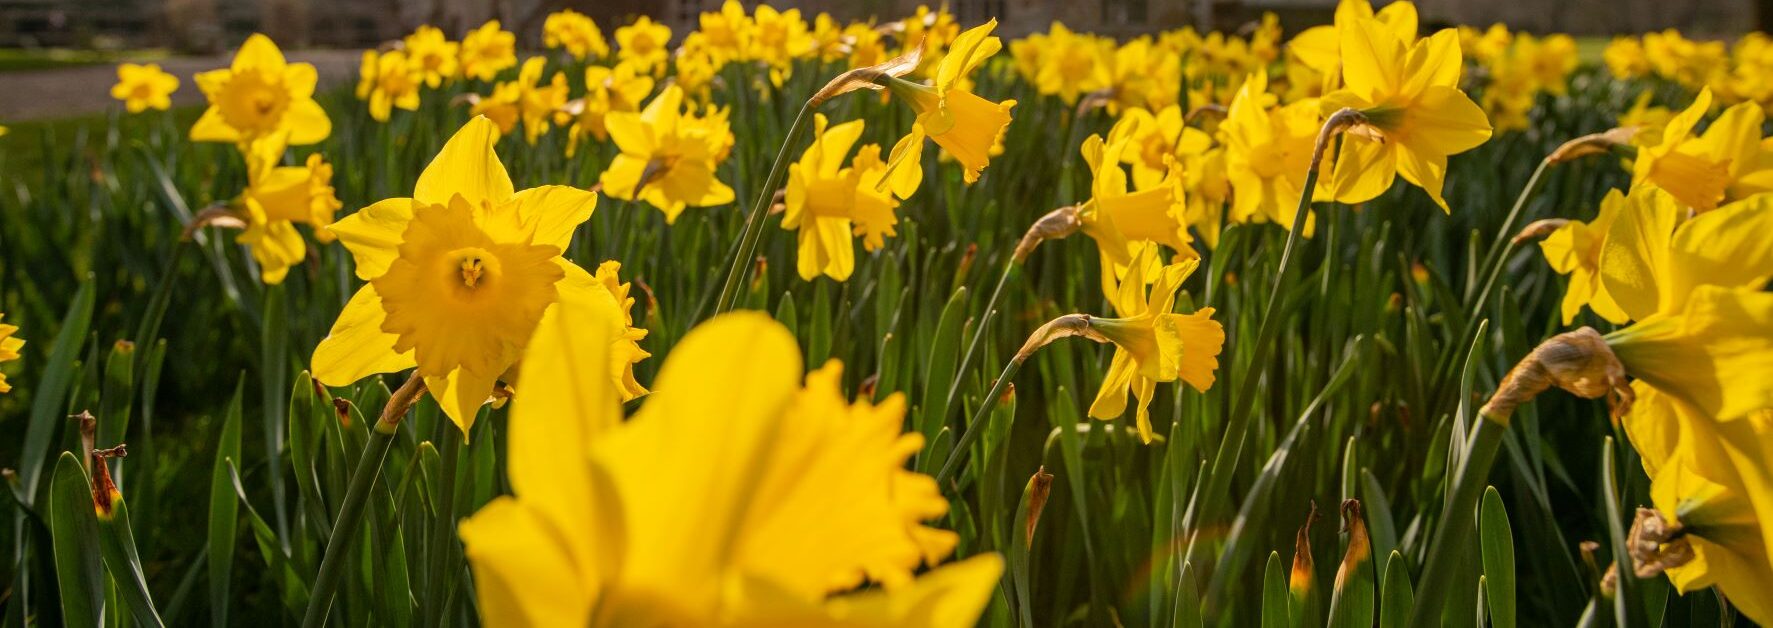 Daffodils in bloom at Michelham Priory, a house and gardens to visit in Sussex